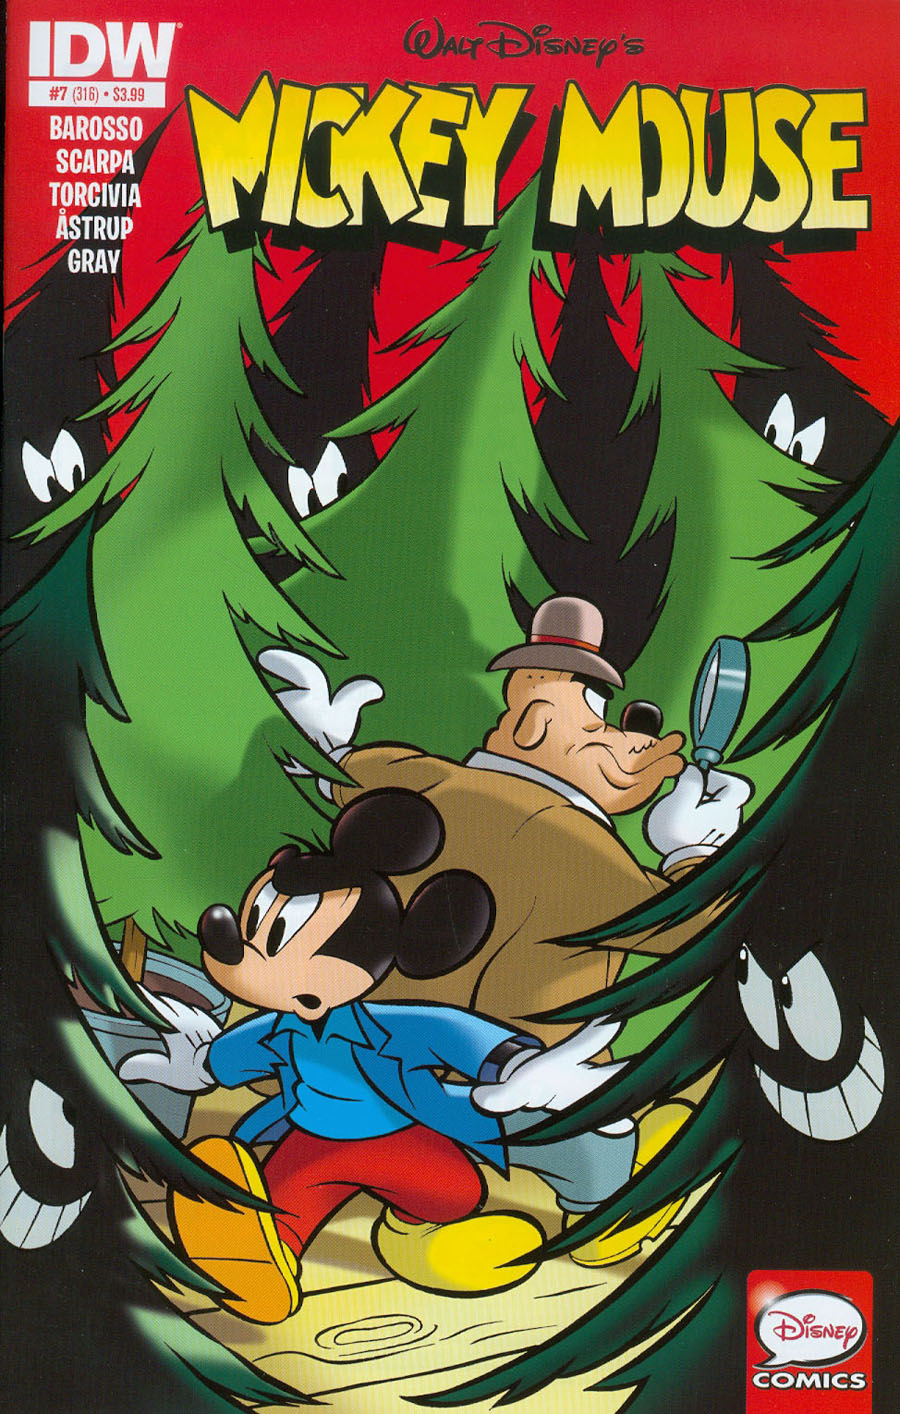 Mickey Mouse Vol 2 #7 Cover A Regular Andrea Casty Castellan Cover